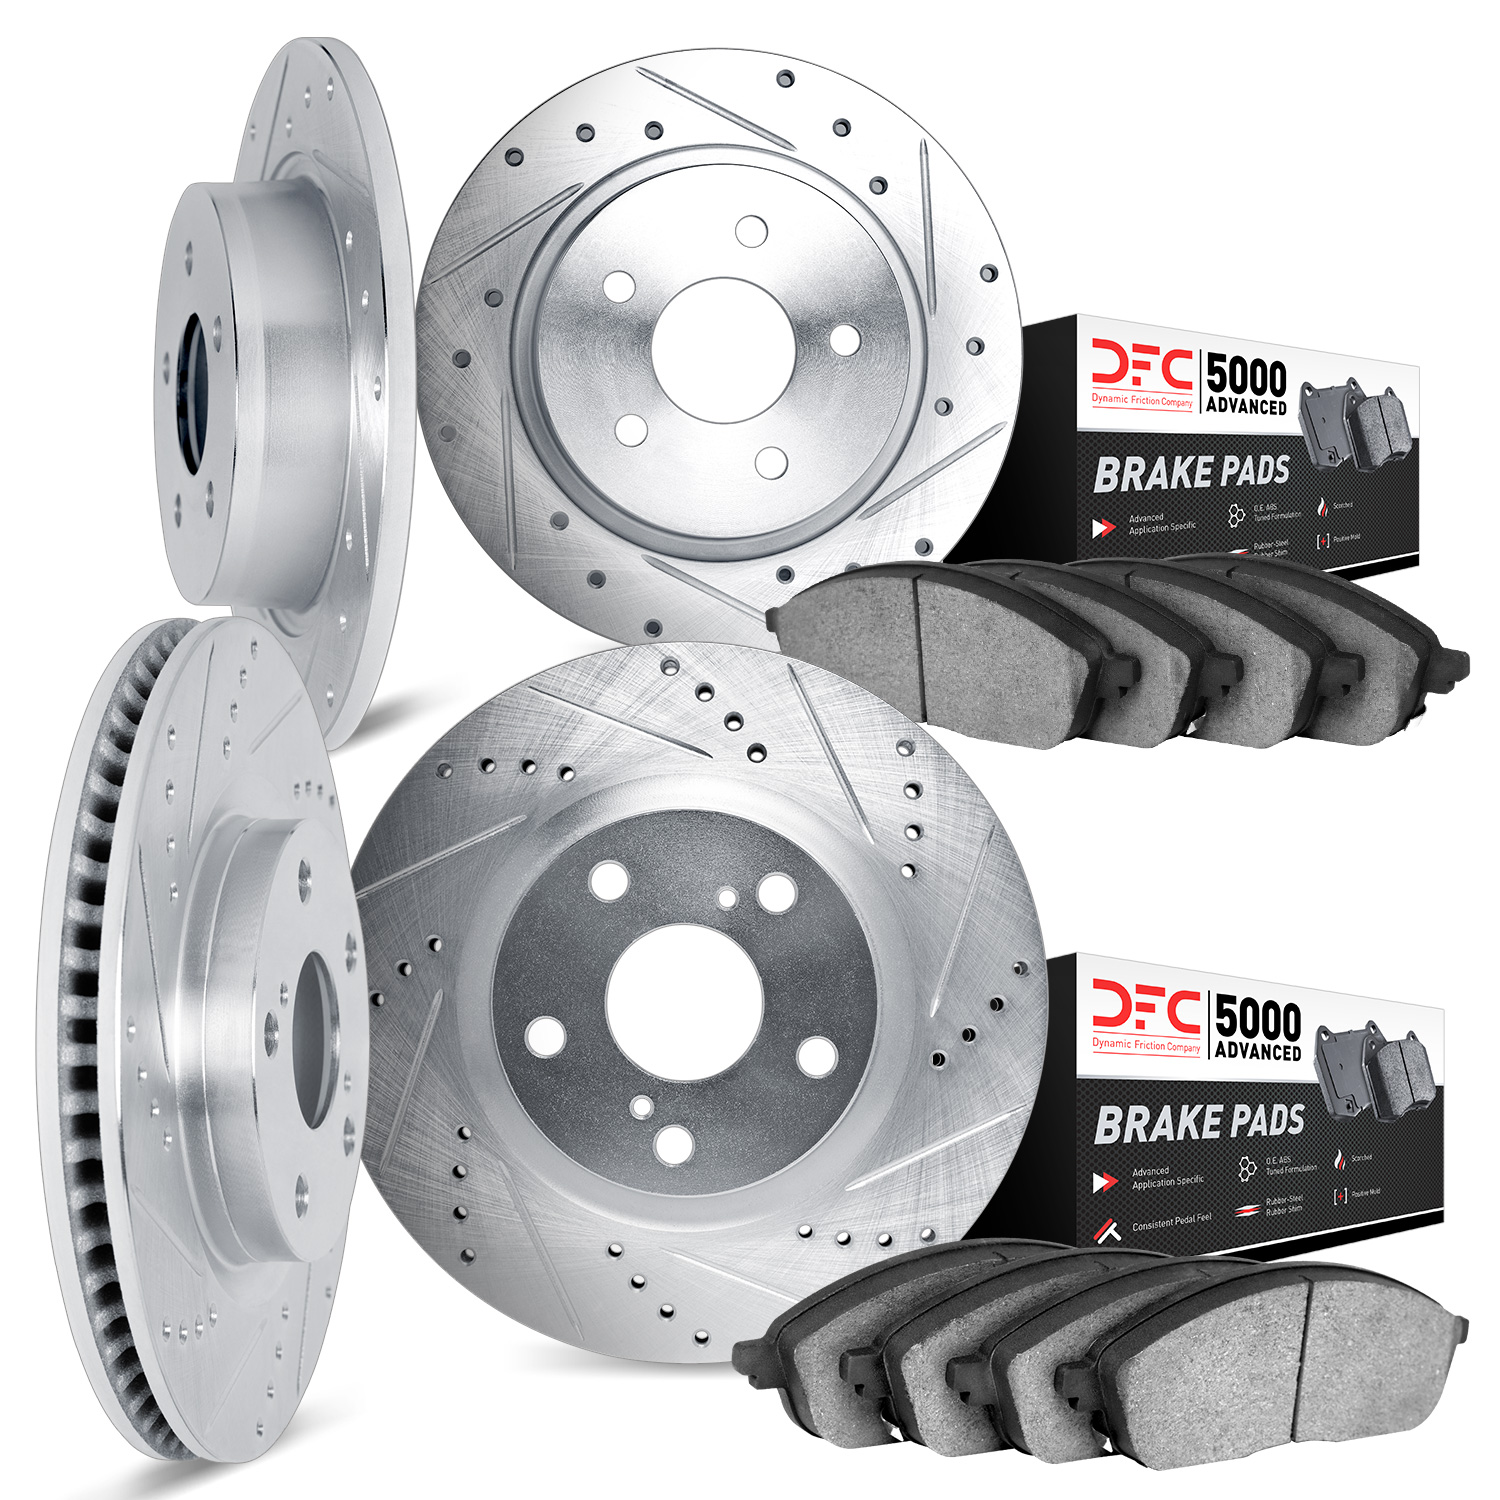 7504-76140 Drilled/Slotted Brake Rotors w/5000 Advanced Brake Pads Kit [Silver], 2003-2006 Lexus/Toyota/Scion, Position: Front a